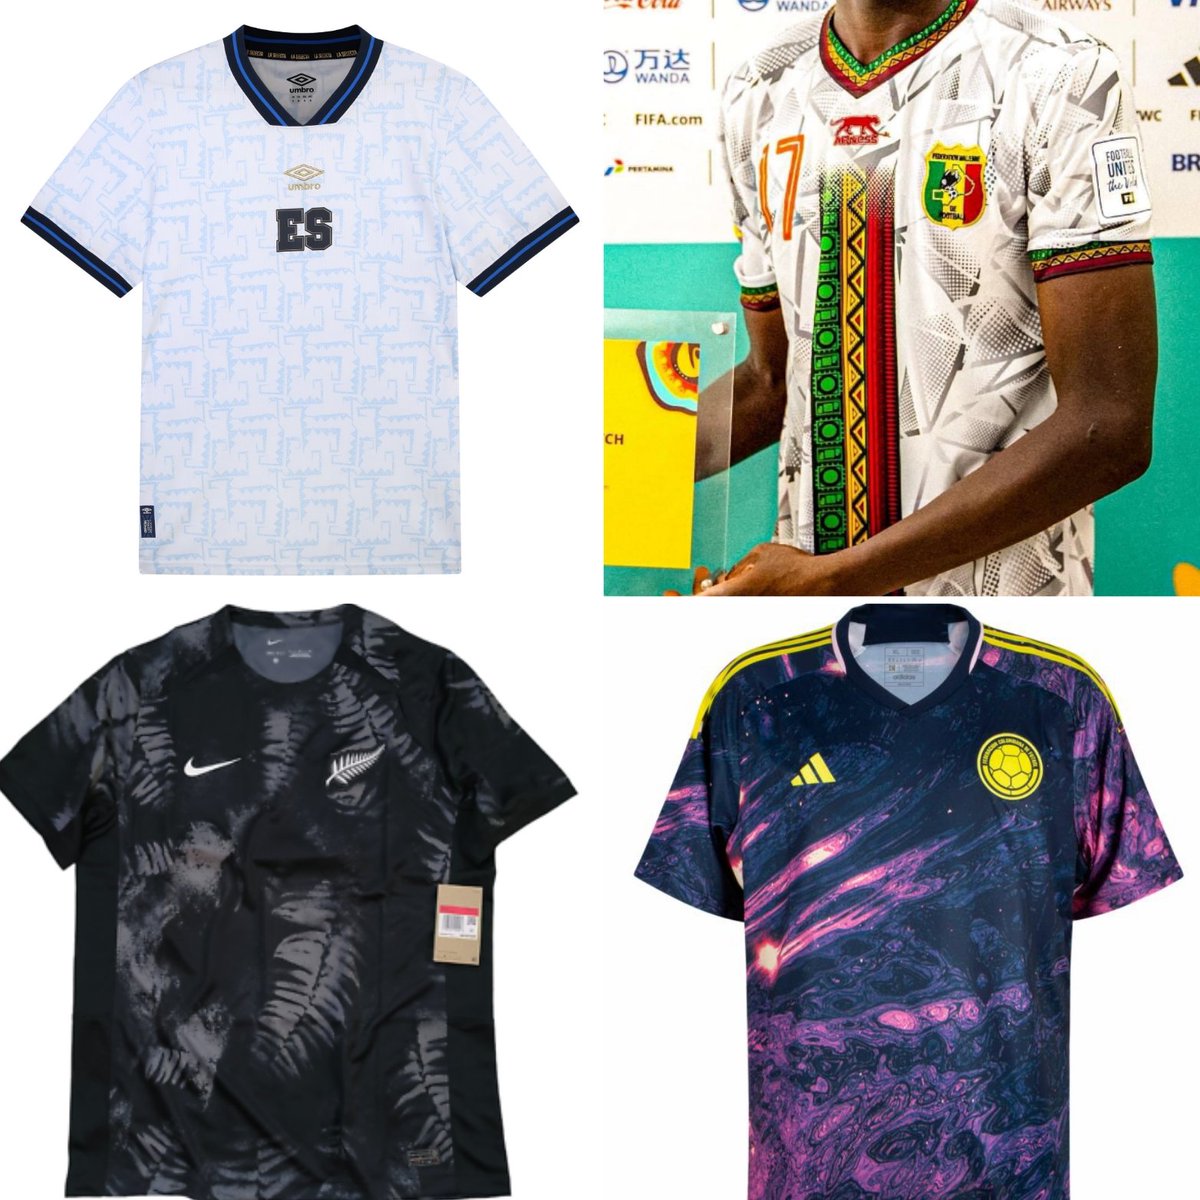 Vote for your National Shirt of the Year. Group X features El Salvador, Mali, New Zealand and Colombia. Poll in the responses. Please RT. #NSOTY2023